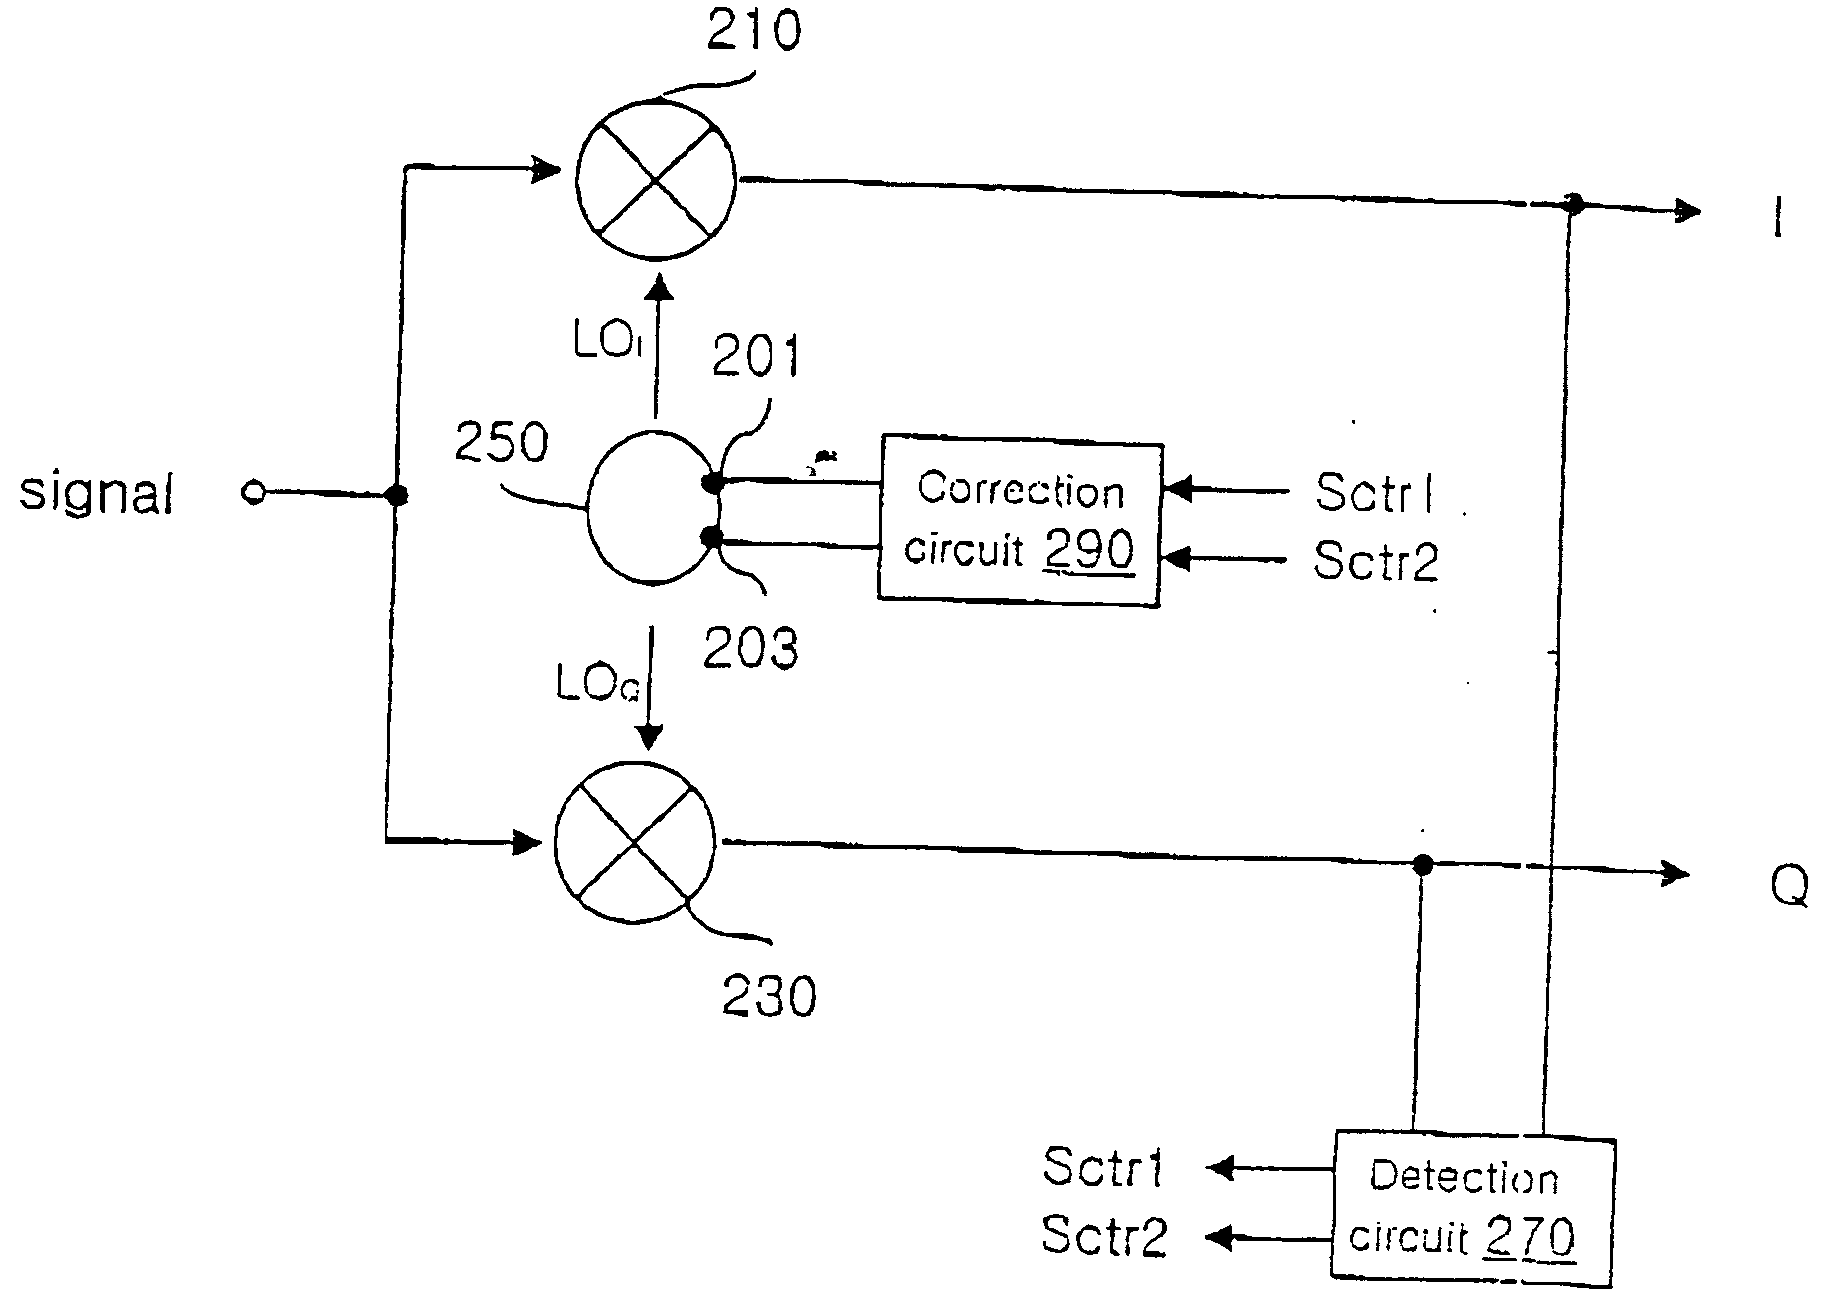 Local oscillator using I/Q mismatch compensating circuit through LO path receiver using thereof